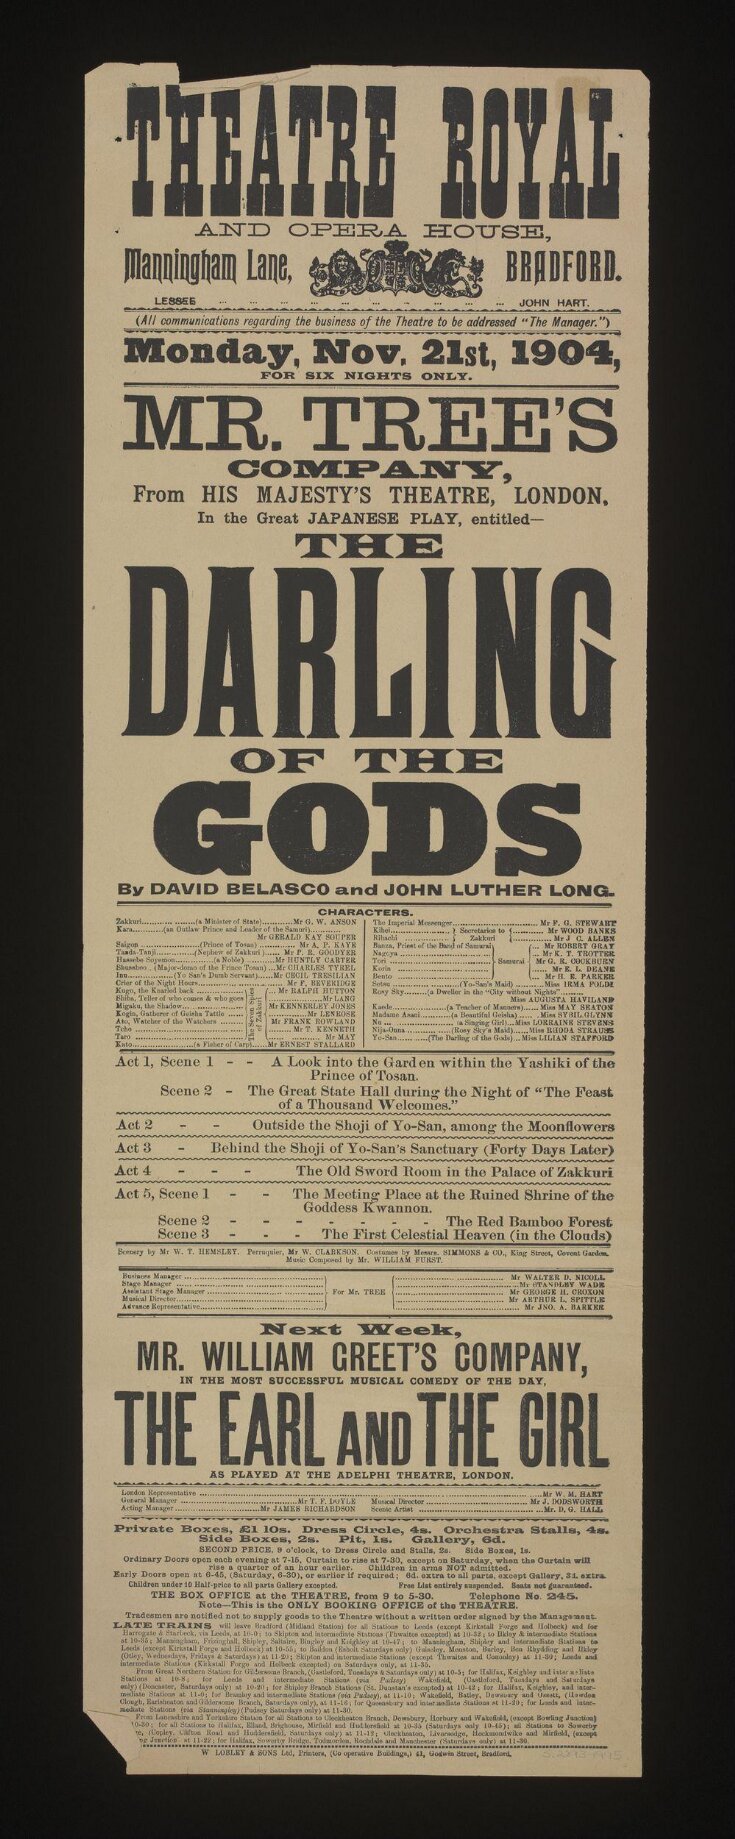 The Darling of the Gods poster image